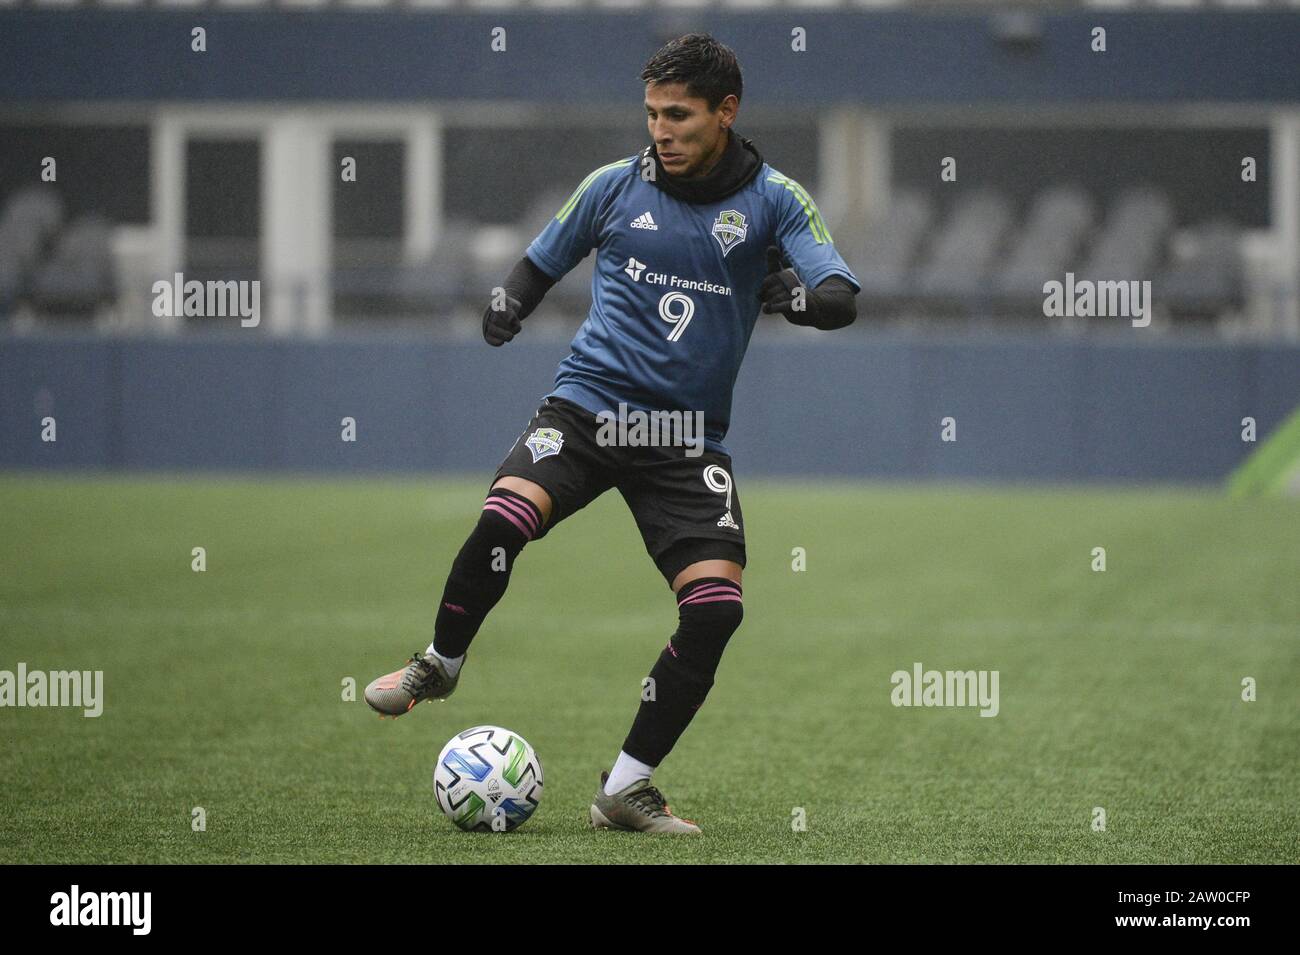 Seattle, Washington, USA. 5th Feb, 2020. The Seattle Sounder Raul Ruidiaz (9) in action as the Sacramento Republic FC visits the Seattle Sounders in a friendly preseason match at Century Link Field in Seattle, WA. Credit: Jeff Halstead/ZUMA Wire/Alamy Live News Stock Photo